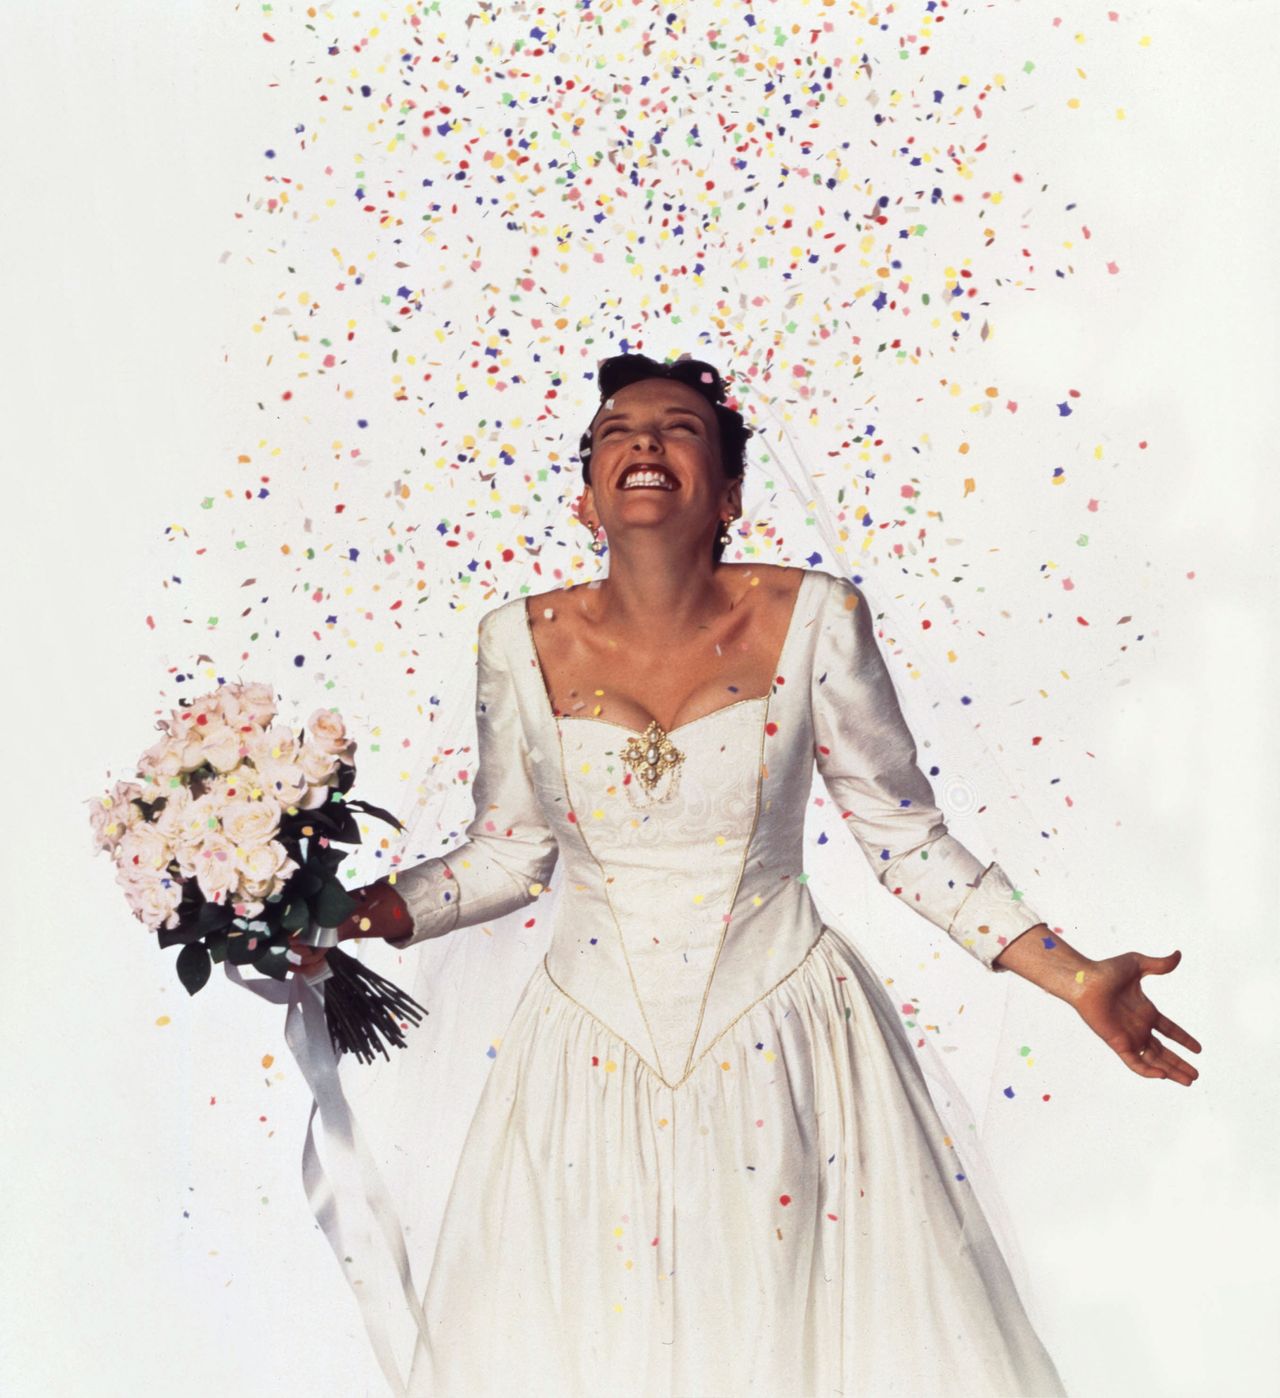 Toni's performance in the 1994 dark comedy Muriel's Wedding earned her universal acclaim